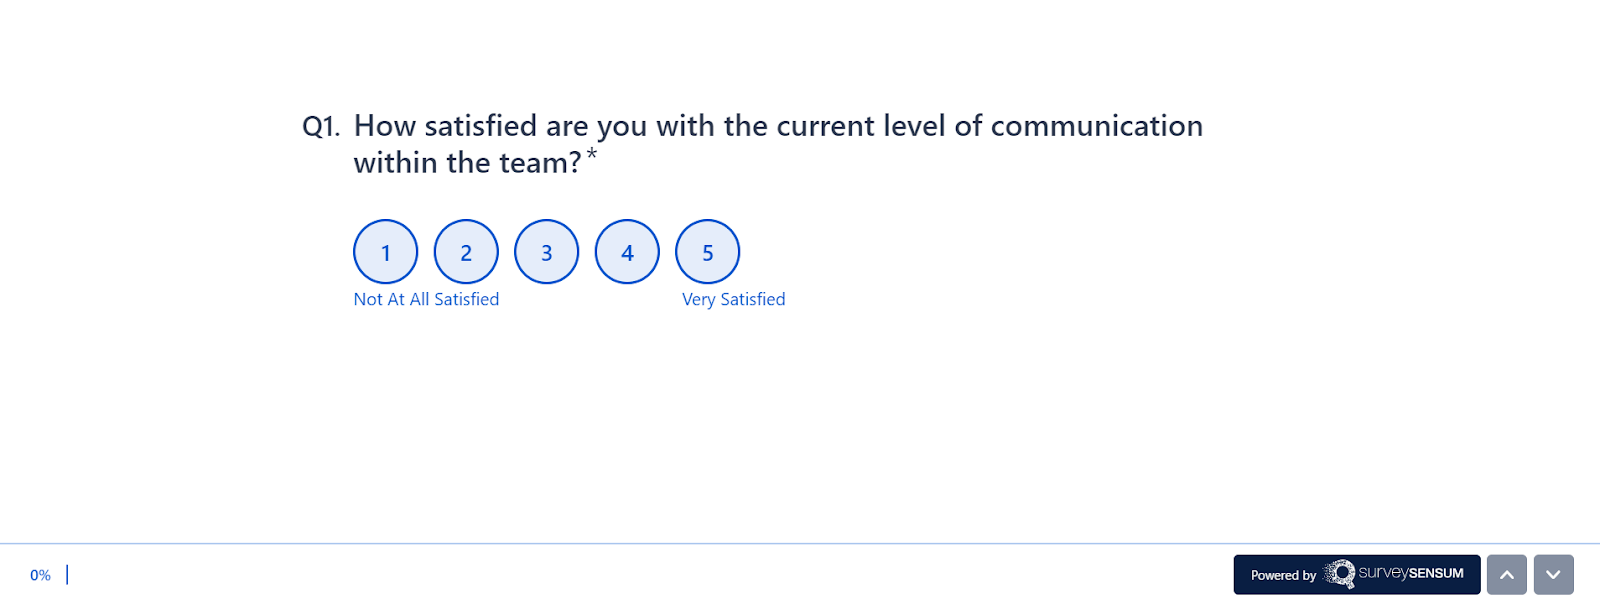 This image shows the example of an employee survey